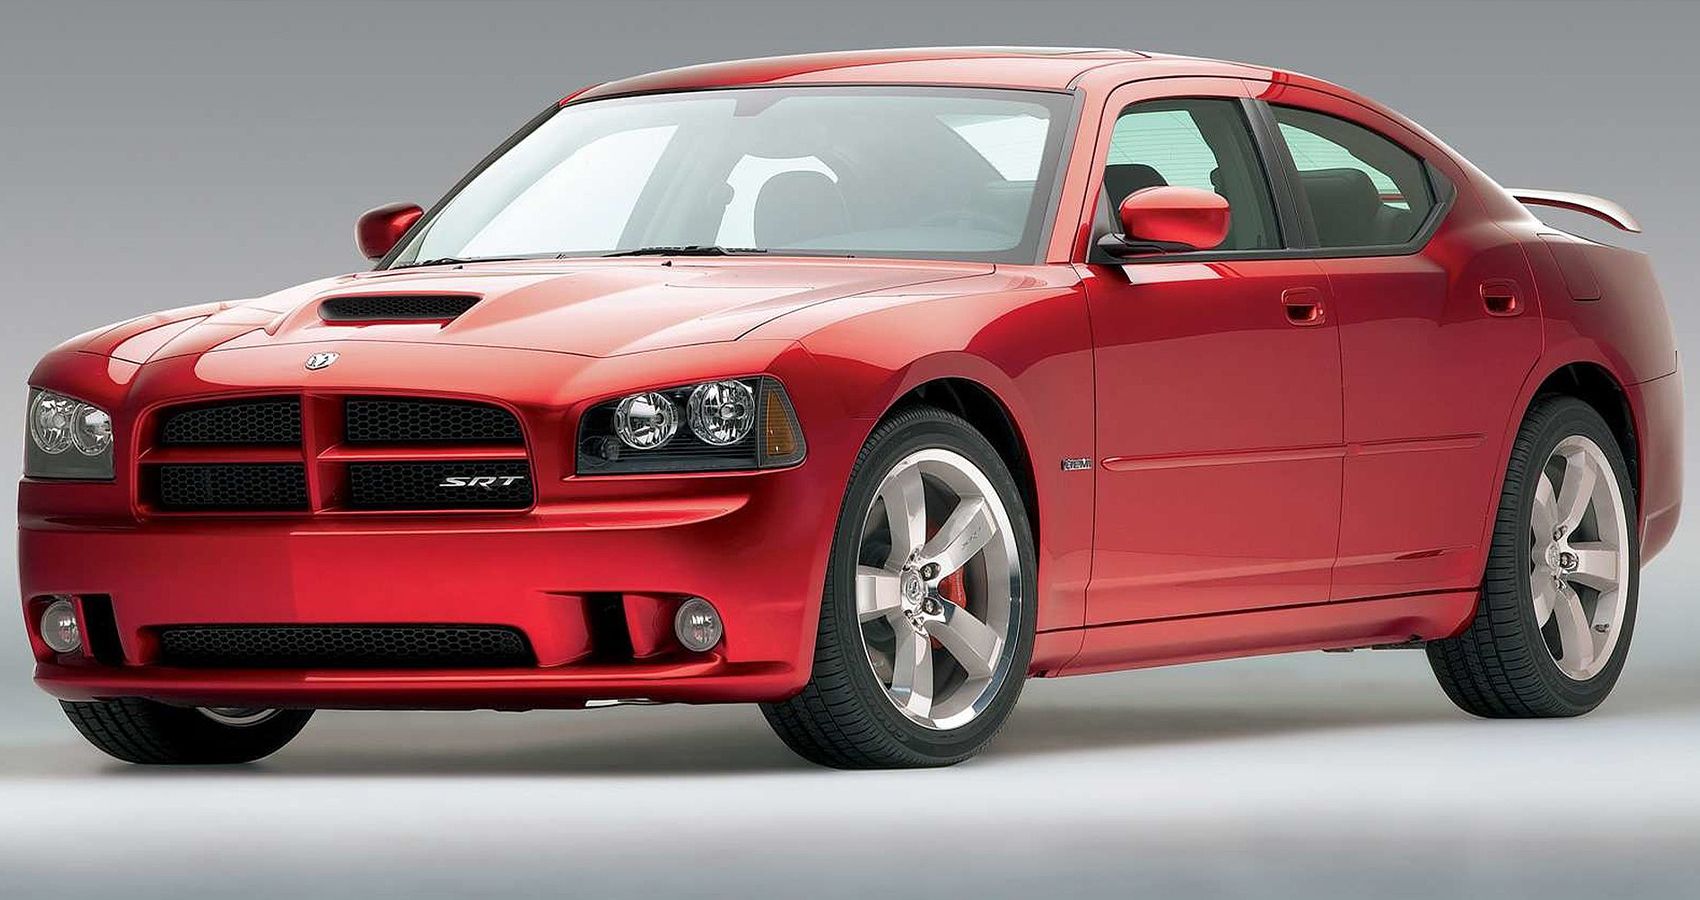 2006 Dodge Charger SRT in Red